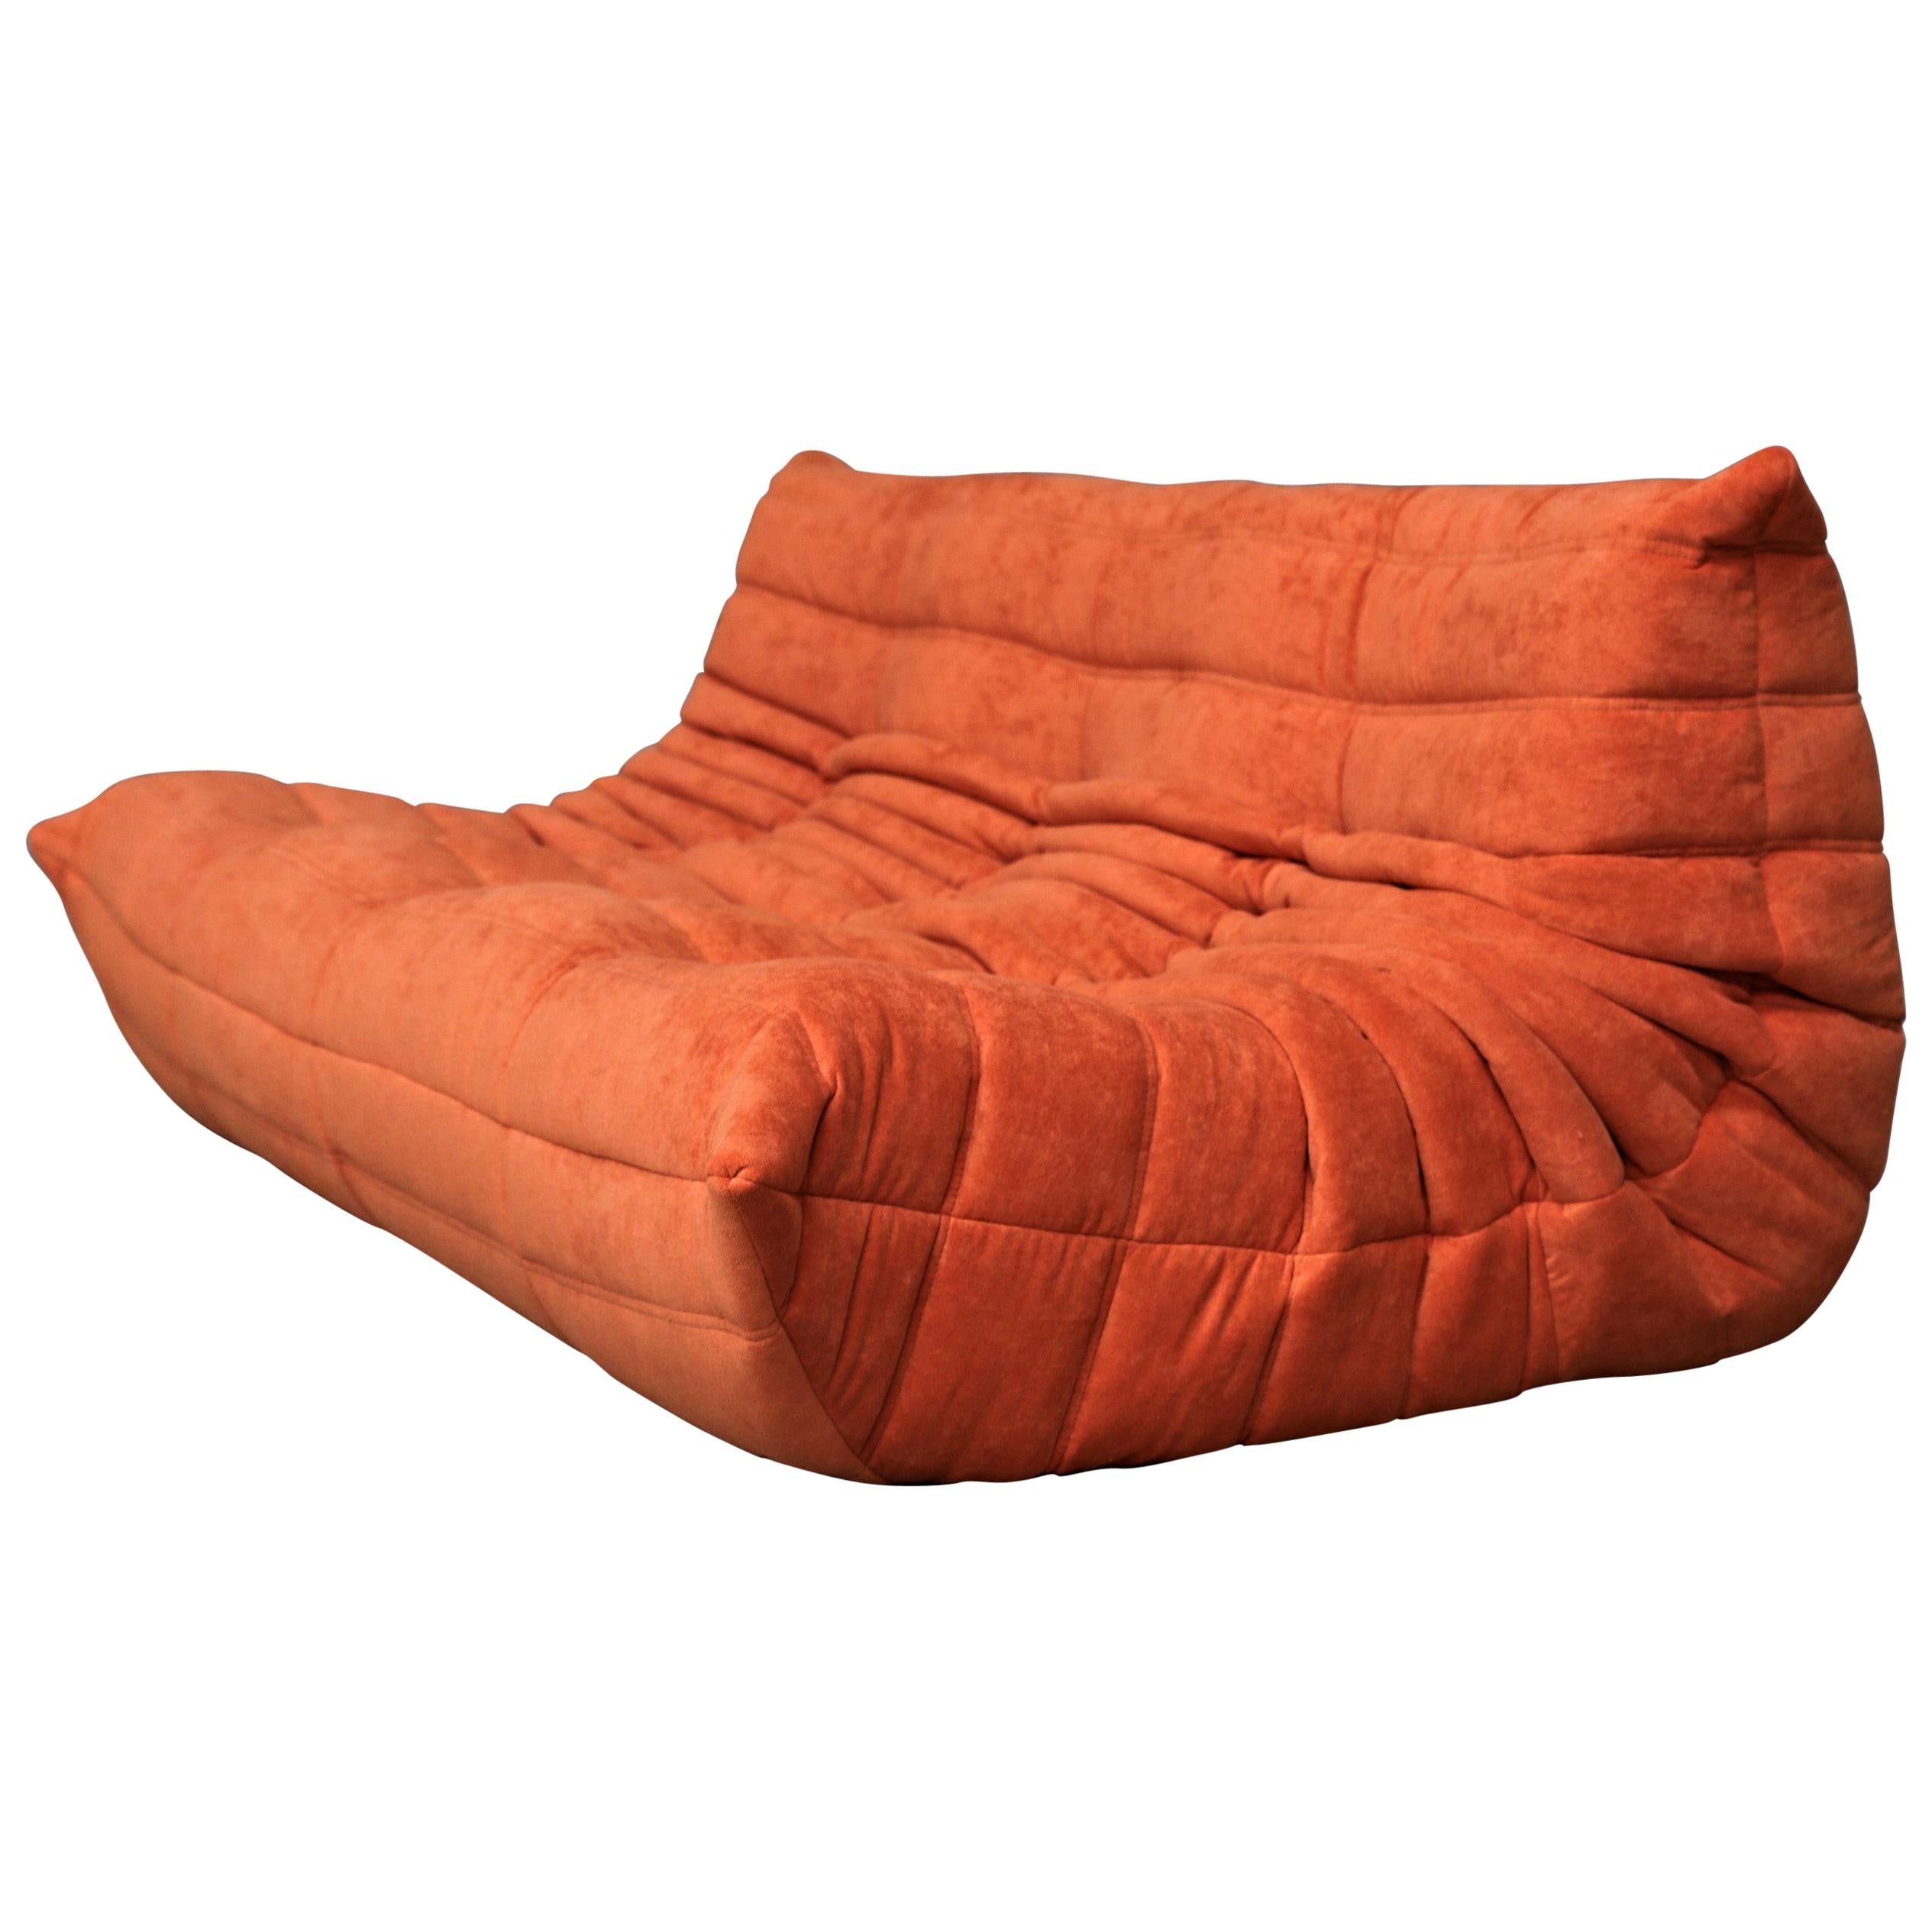 CERTIFIED  Ligne Roset TOGO 3-Seat in Free Stain Orange fabric, DIAMOND QUALITY For Sale